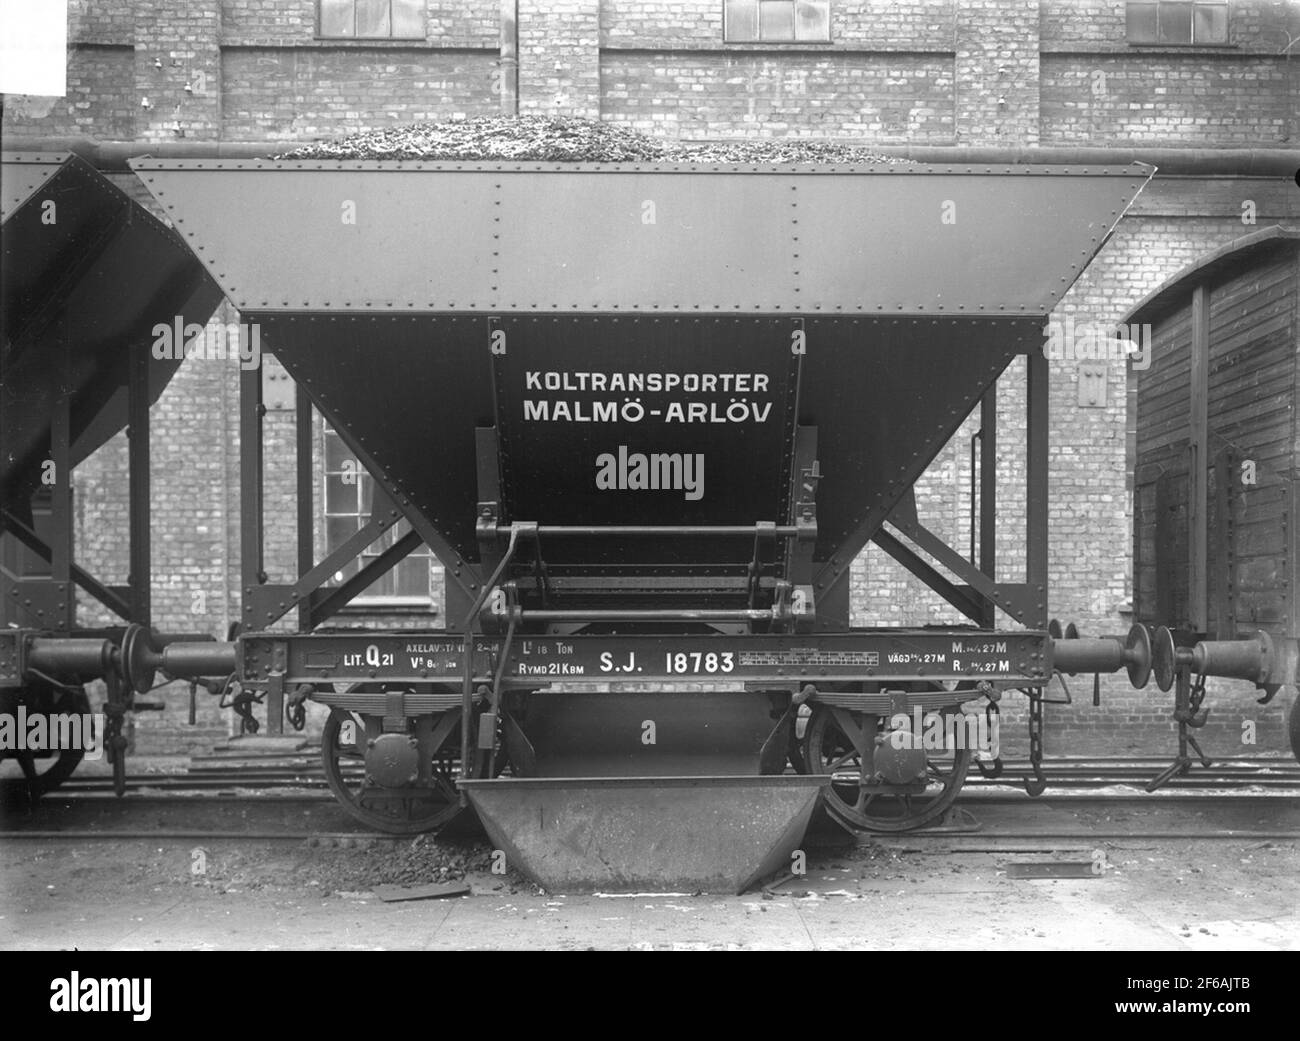 The state railways, SJ self-buldizing caramel Q21 18783.4st carts with 210hl space, with unloading in a hold was built in 1927 by SJ.Dessa carts used for carbon transport from Malmö to the sugar mill in Arlöv.These carbon cars got to literate Q21 Stock Photo